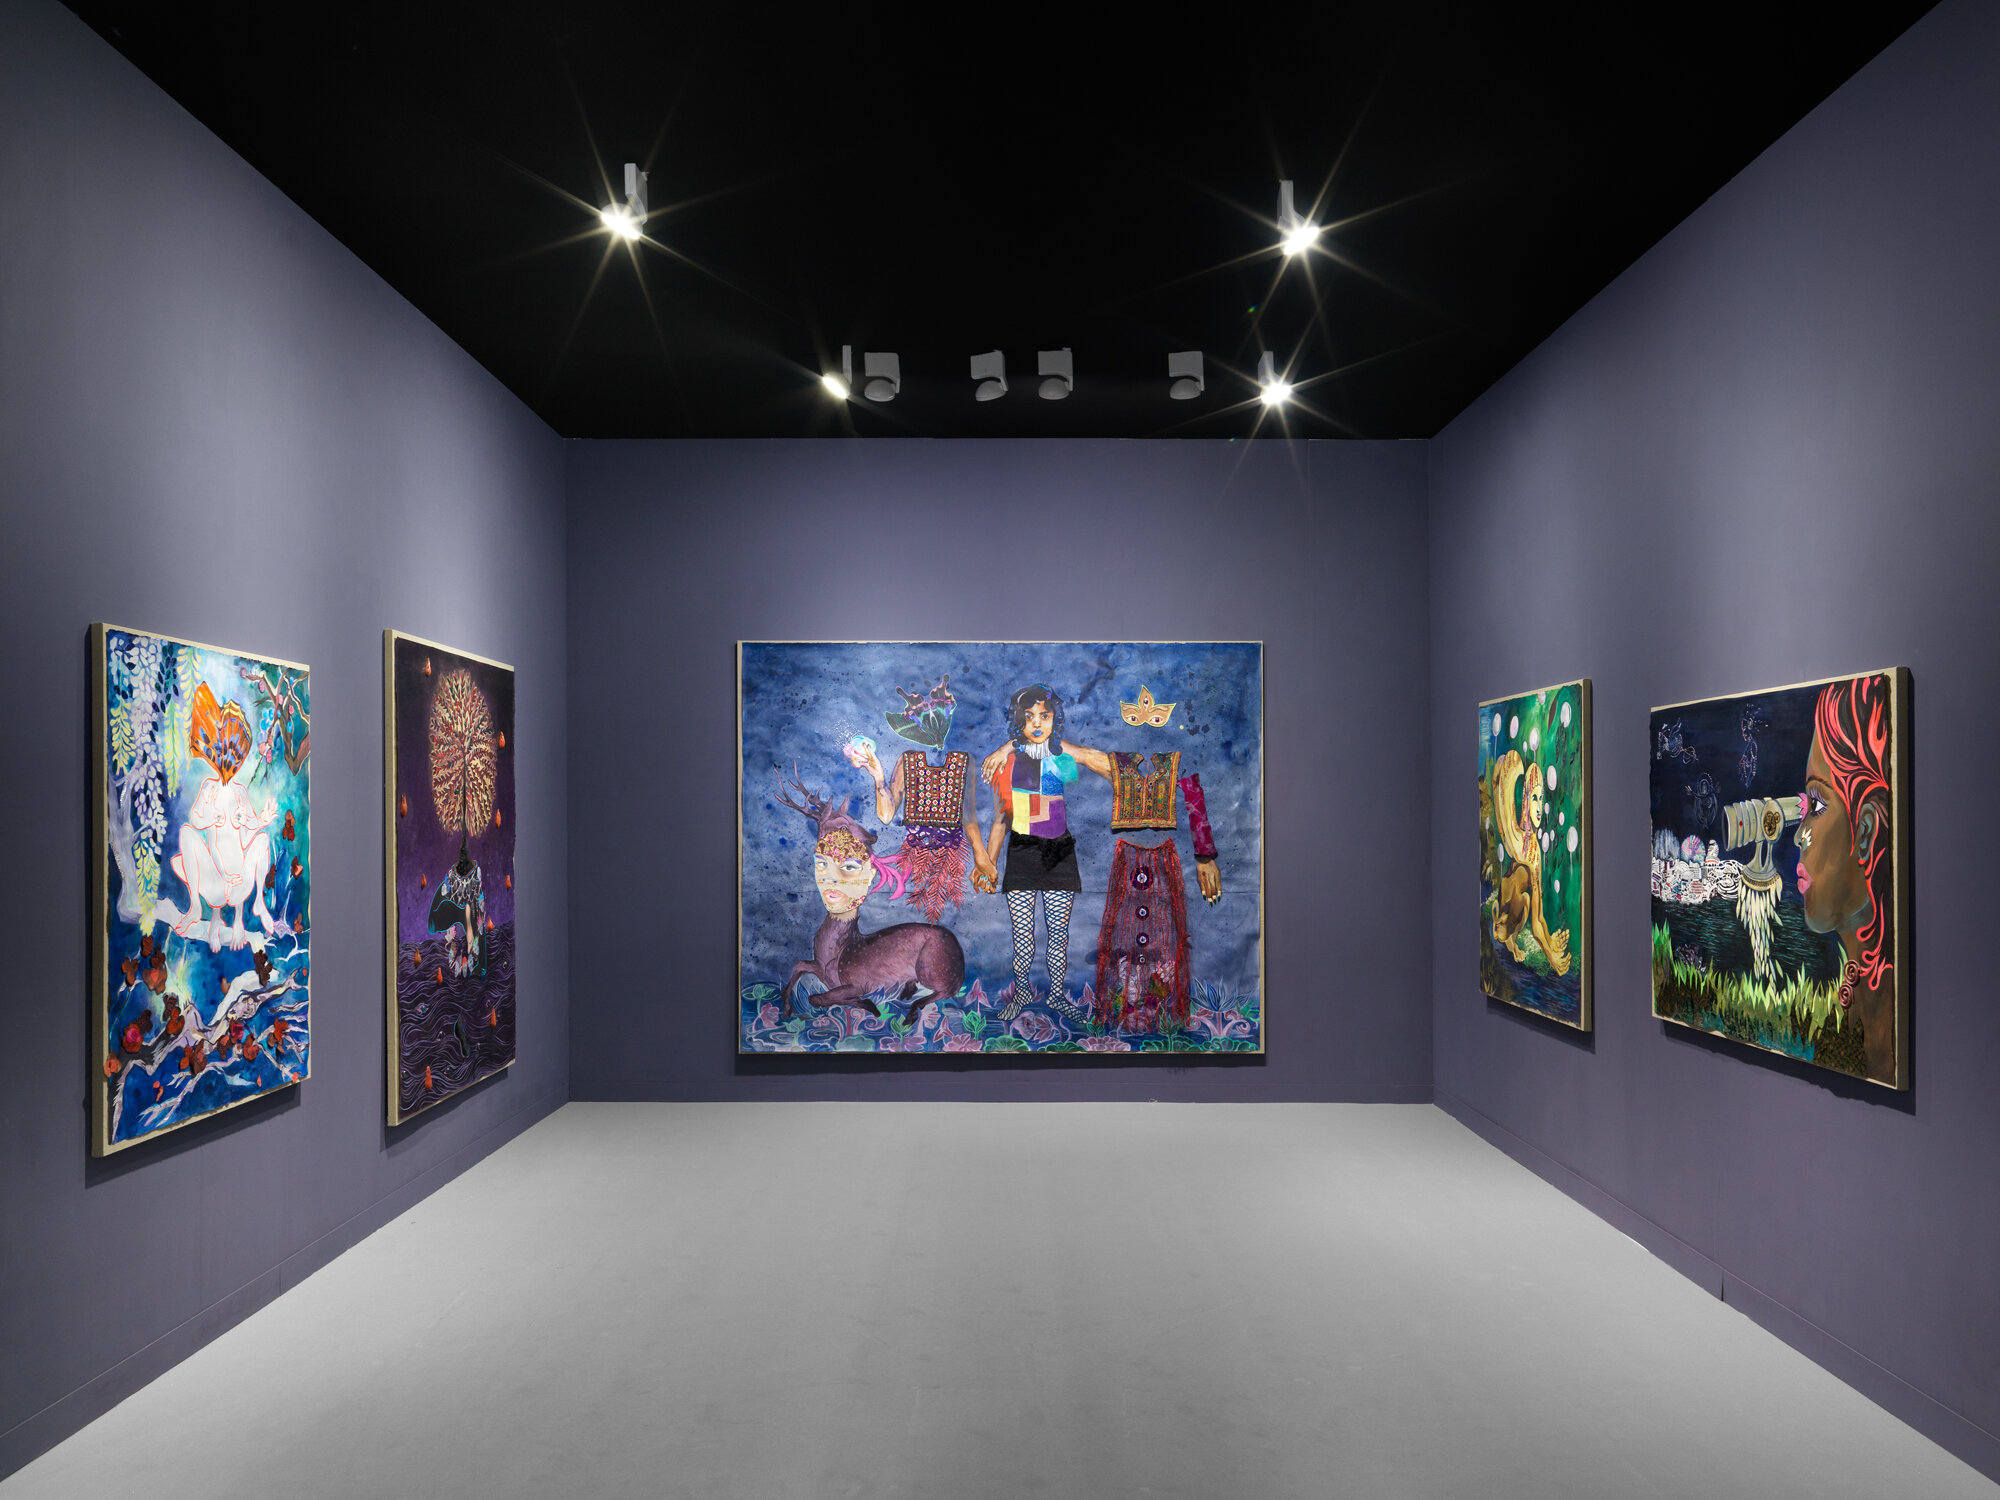   Chitra Ganesh: Unearthly Delights , installation view, Frieze London 2019 invitational section, “Woven”, London, UK, October 3 - 6, 2019, photography: Dan Bradica 